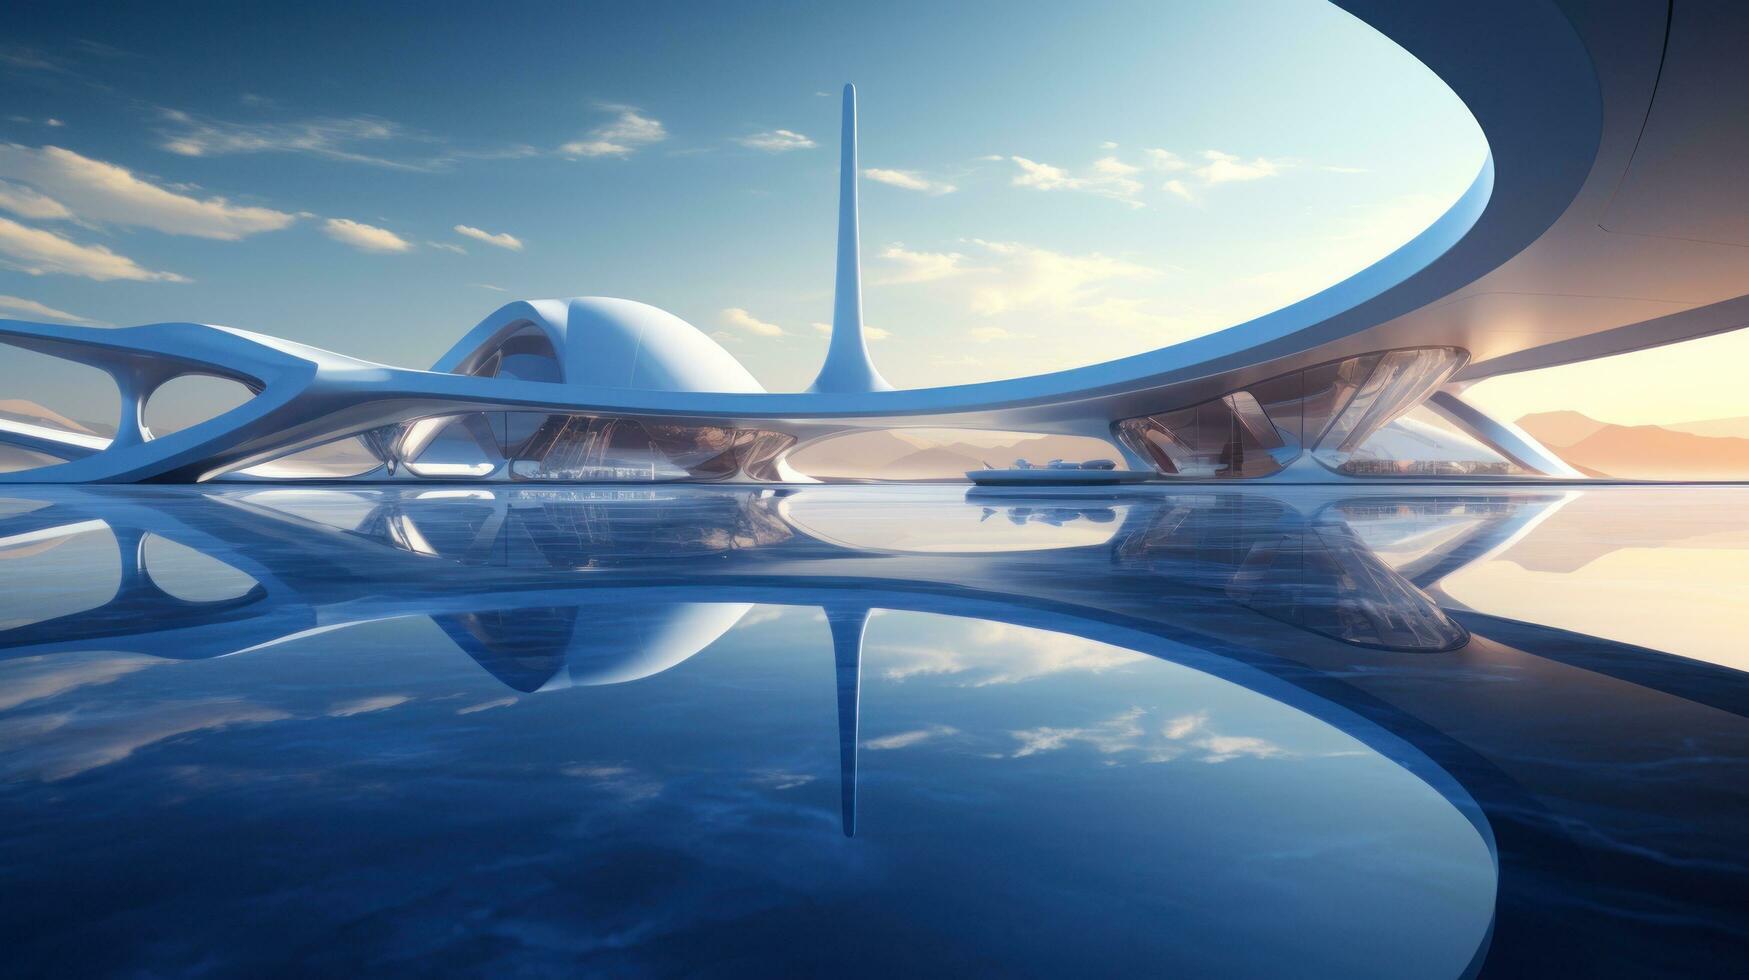 Visualizing Futuristic Architecture with an Abstract 3D Render Check out this 3D render of a stunning futuristic glass architecture. The concrete floor is left empty, leaving plenty to the imagination photo